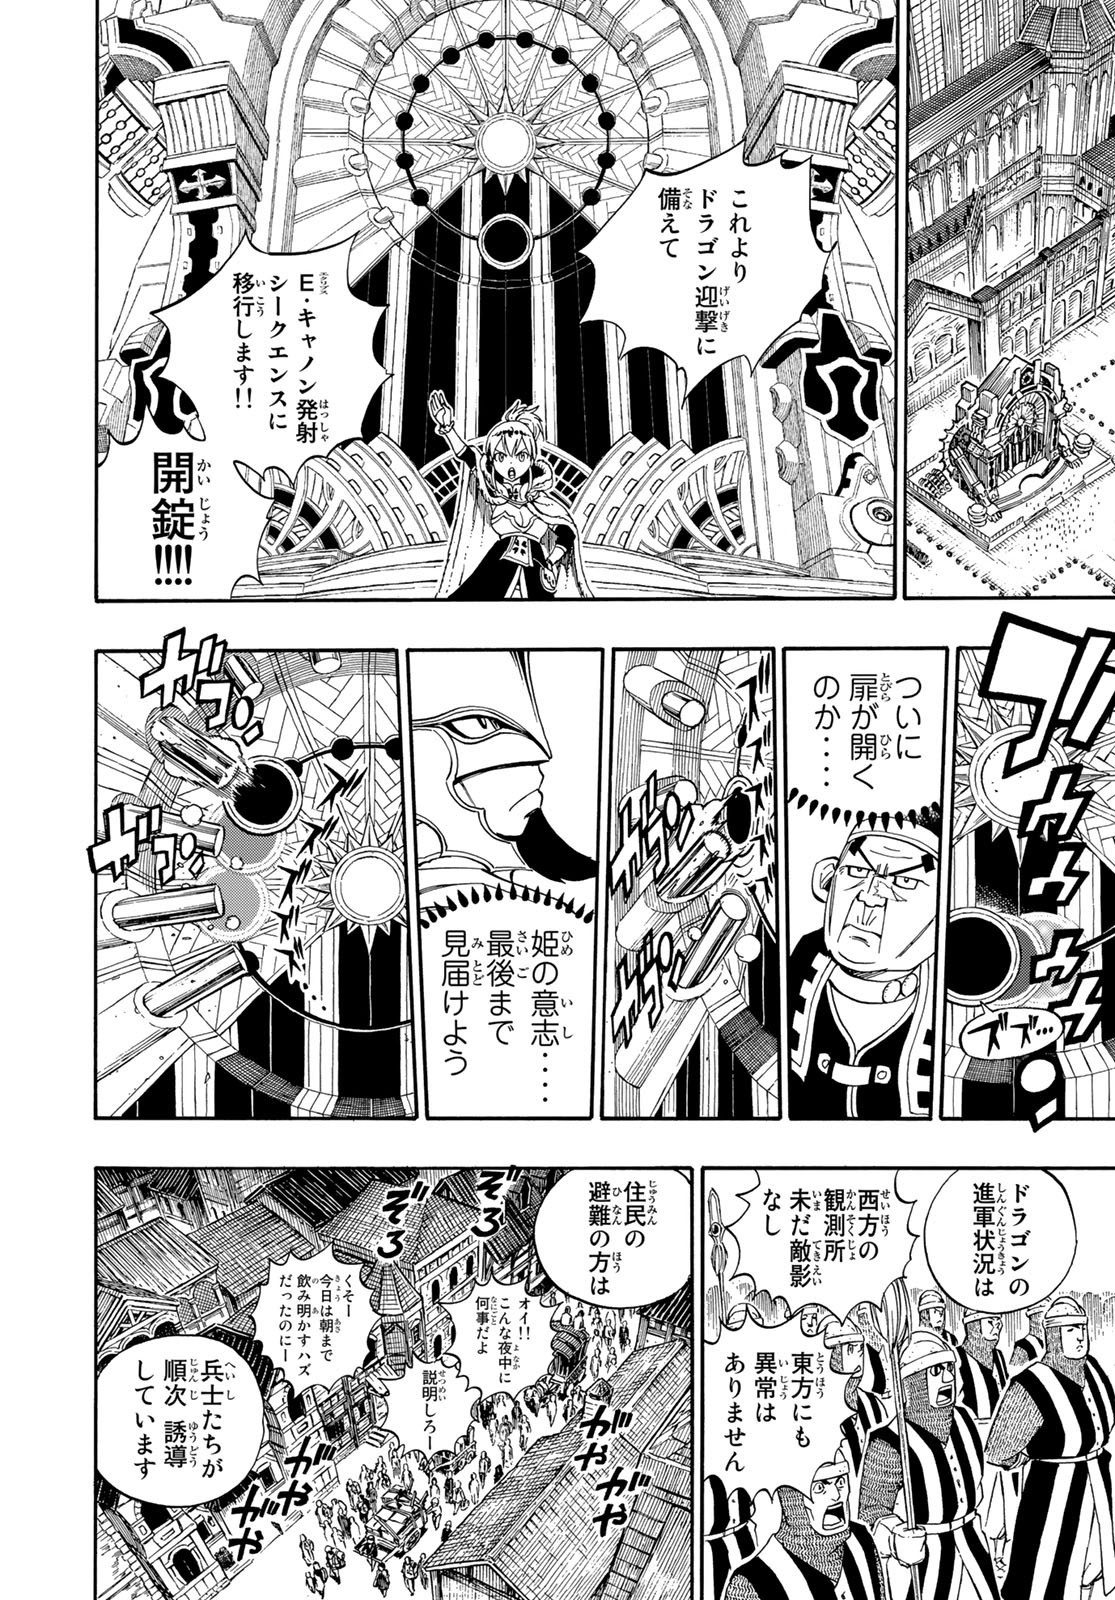 Weekly Shōnen Magazine - 週刊少年マガジン - Chapter 2024-29 - Page 456